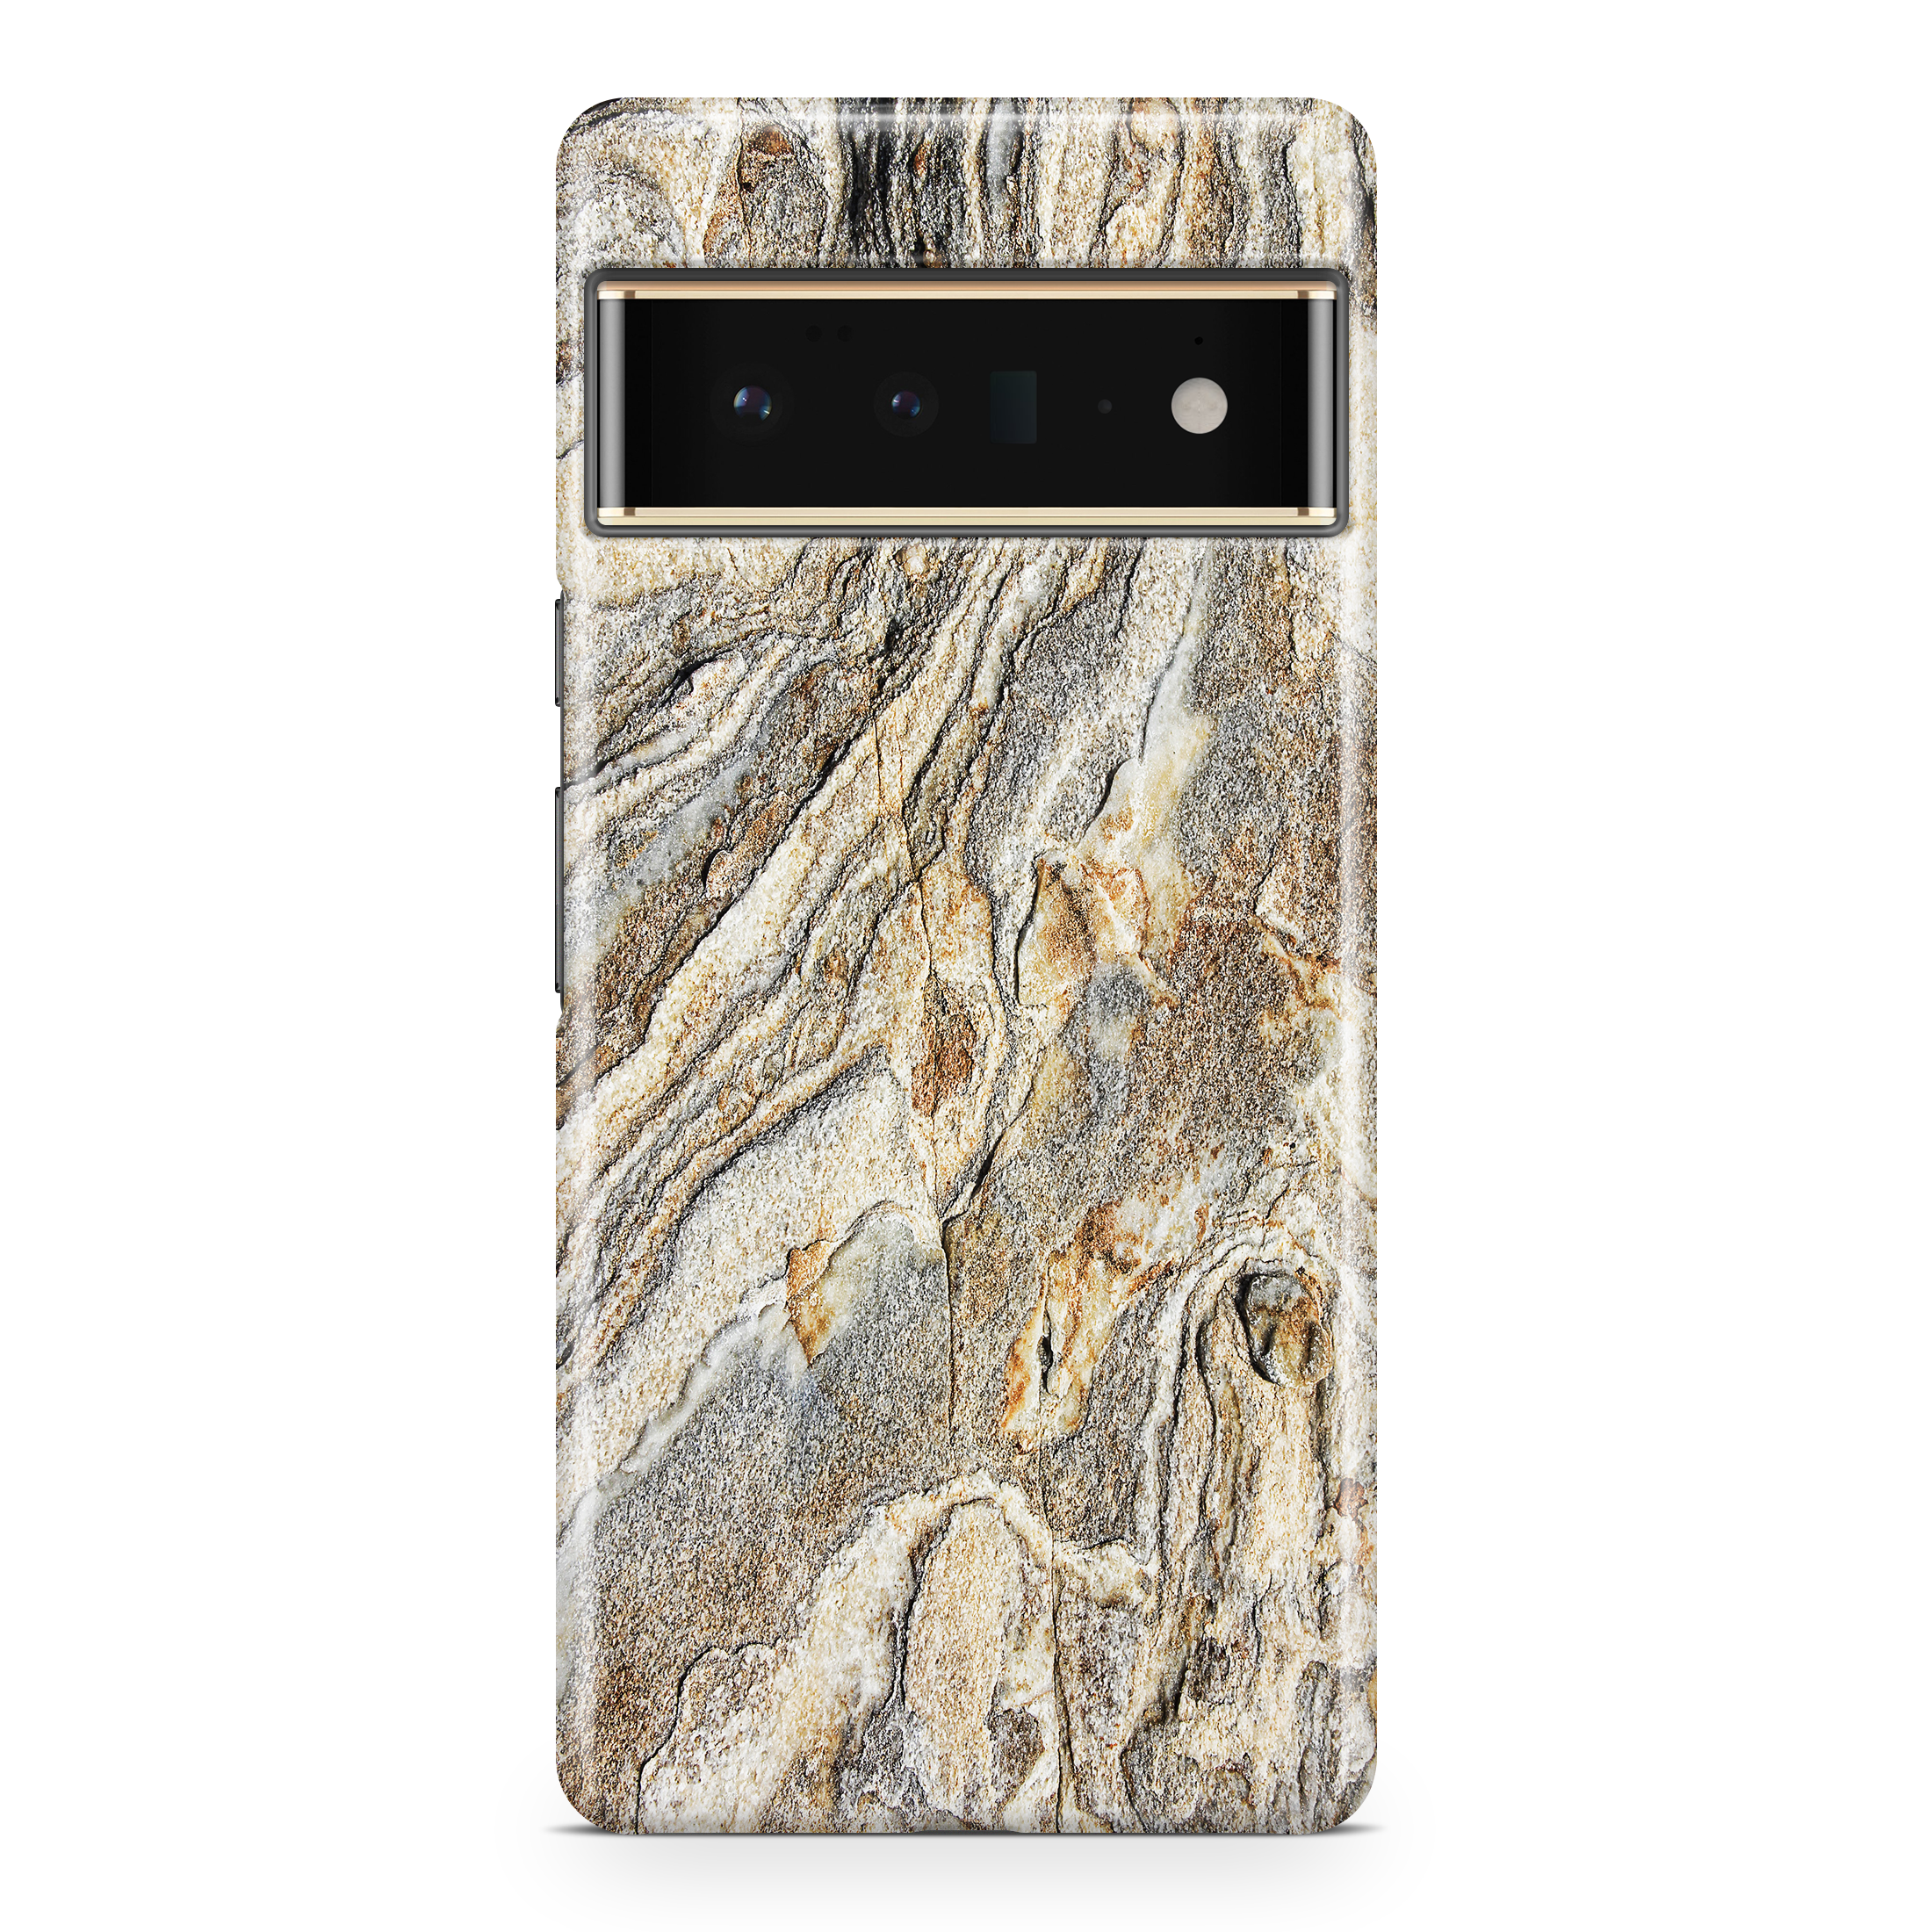 Rough Stone - Google phone case designs by CaseSwagger